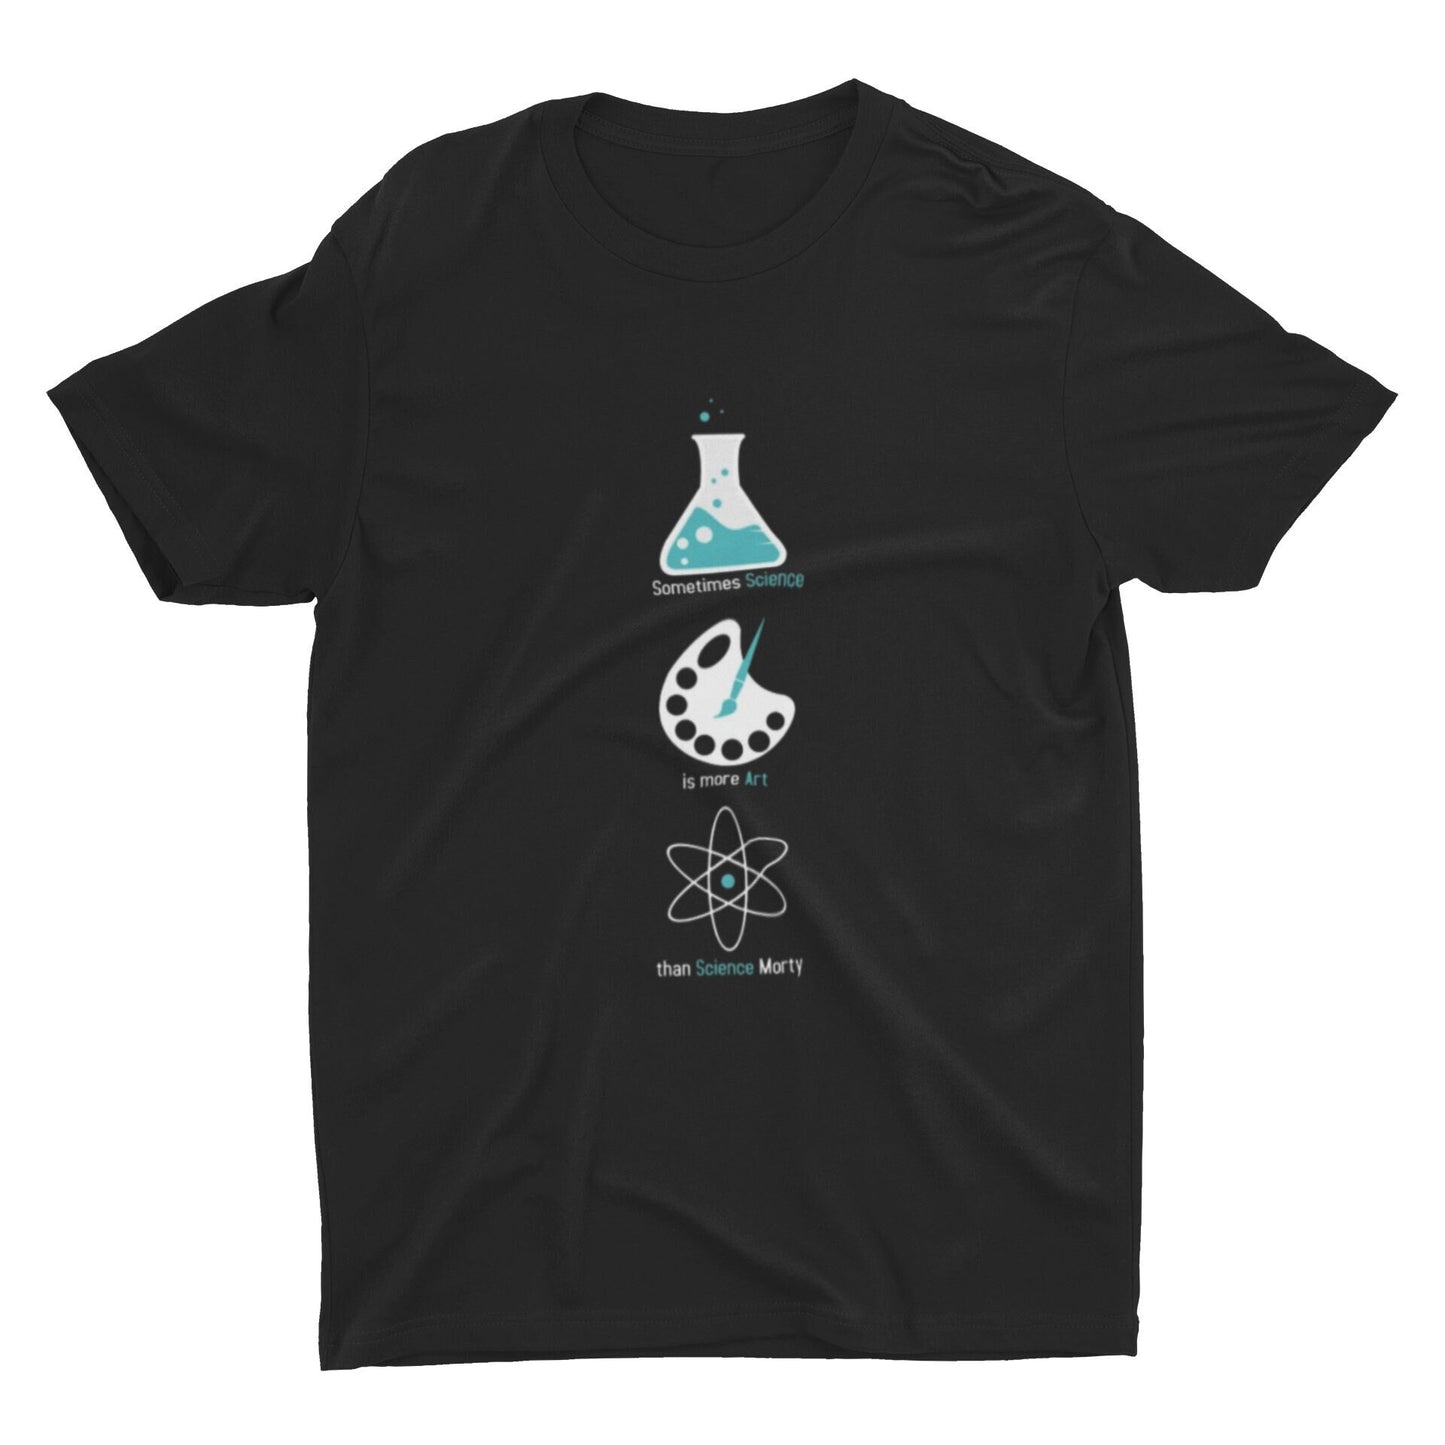 Sometimes Science Is More Art Than Science Morty | Rick And Morty T Shirt | Rick Sanchez T Shirt | Pickle Rick